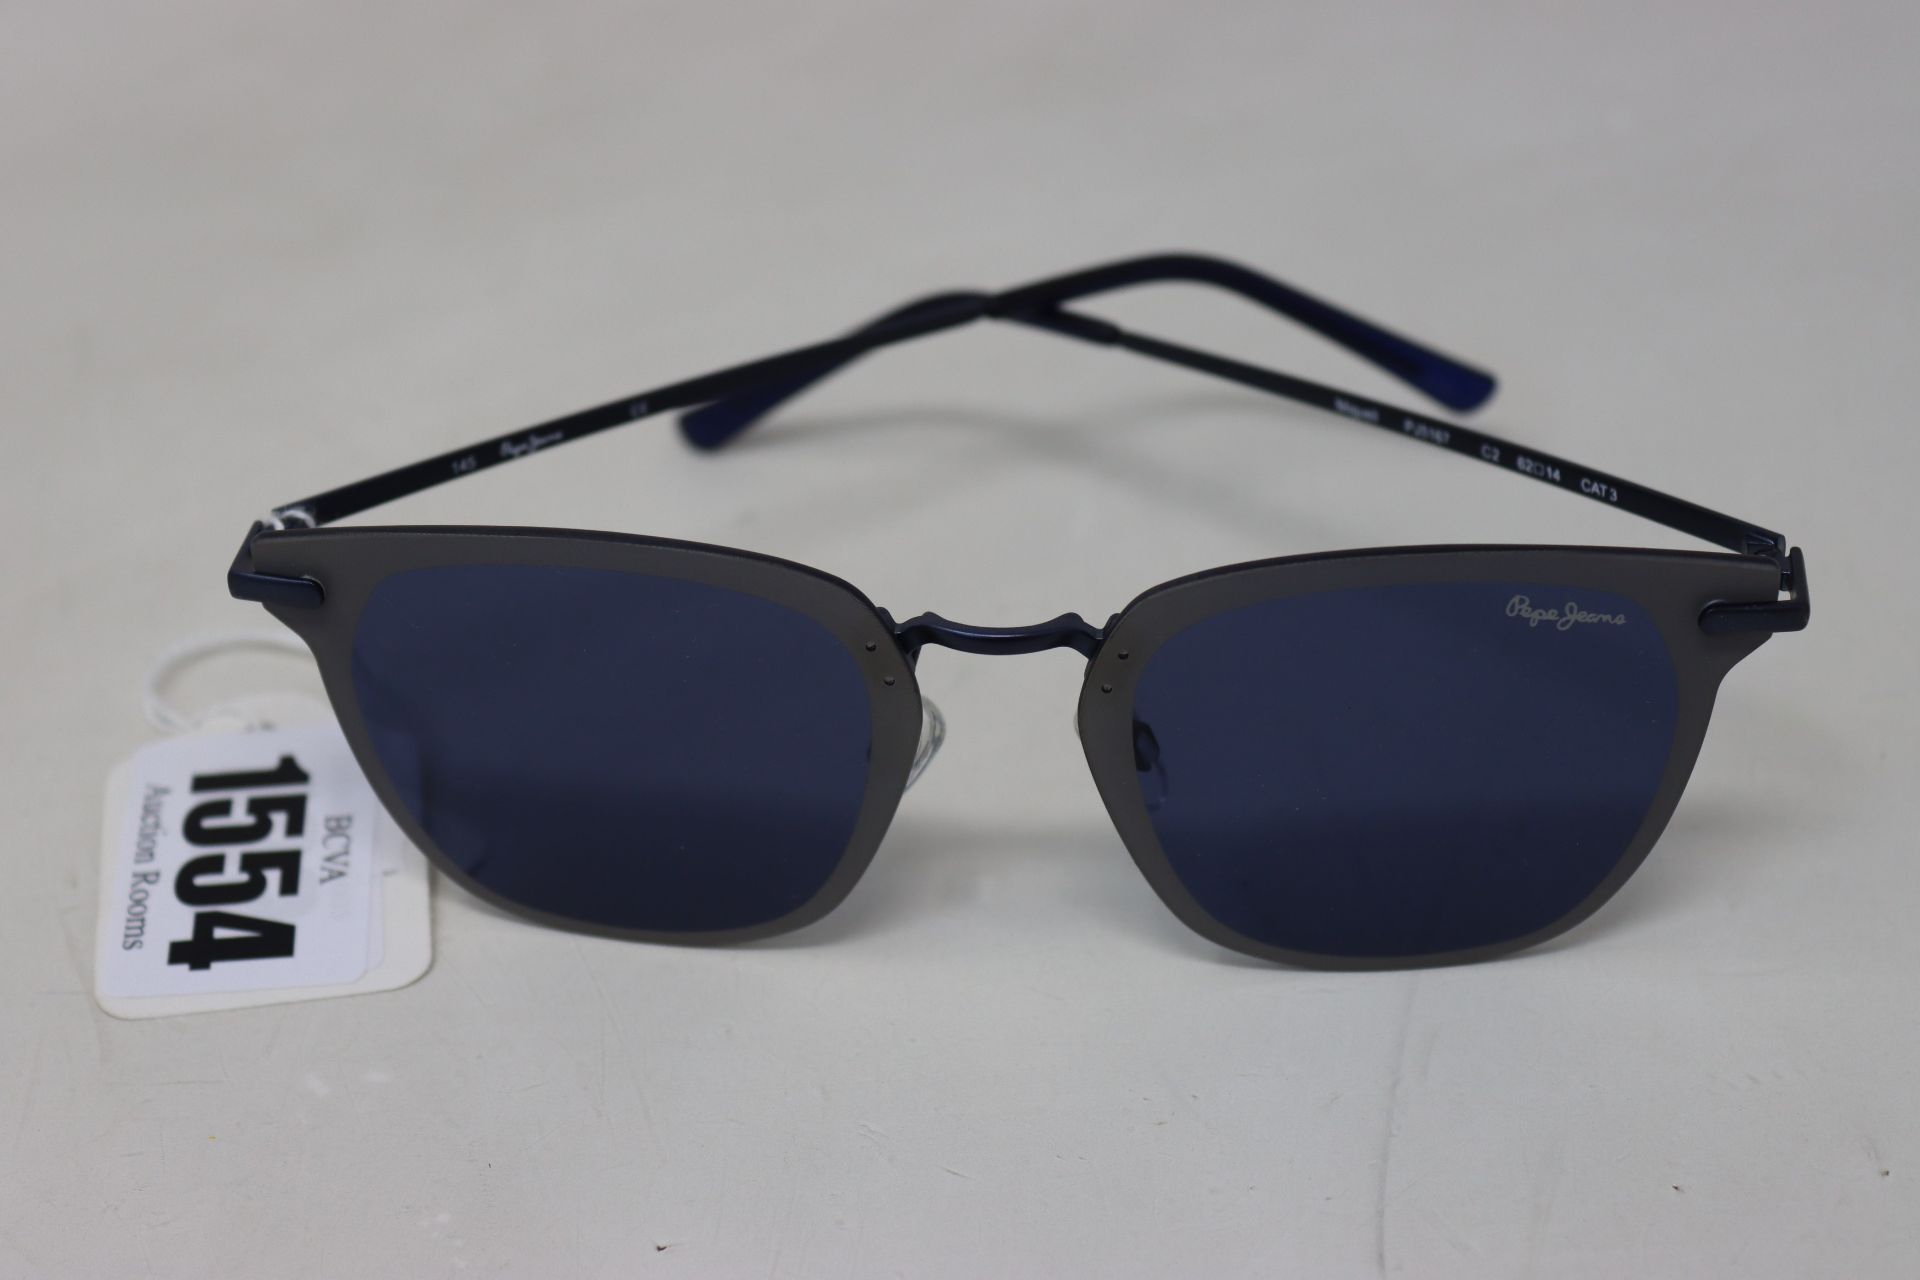 A pair of as new Pepe Jeans Miquell sunglasses (RRP £105 - No case).